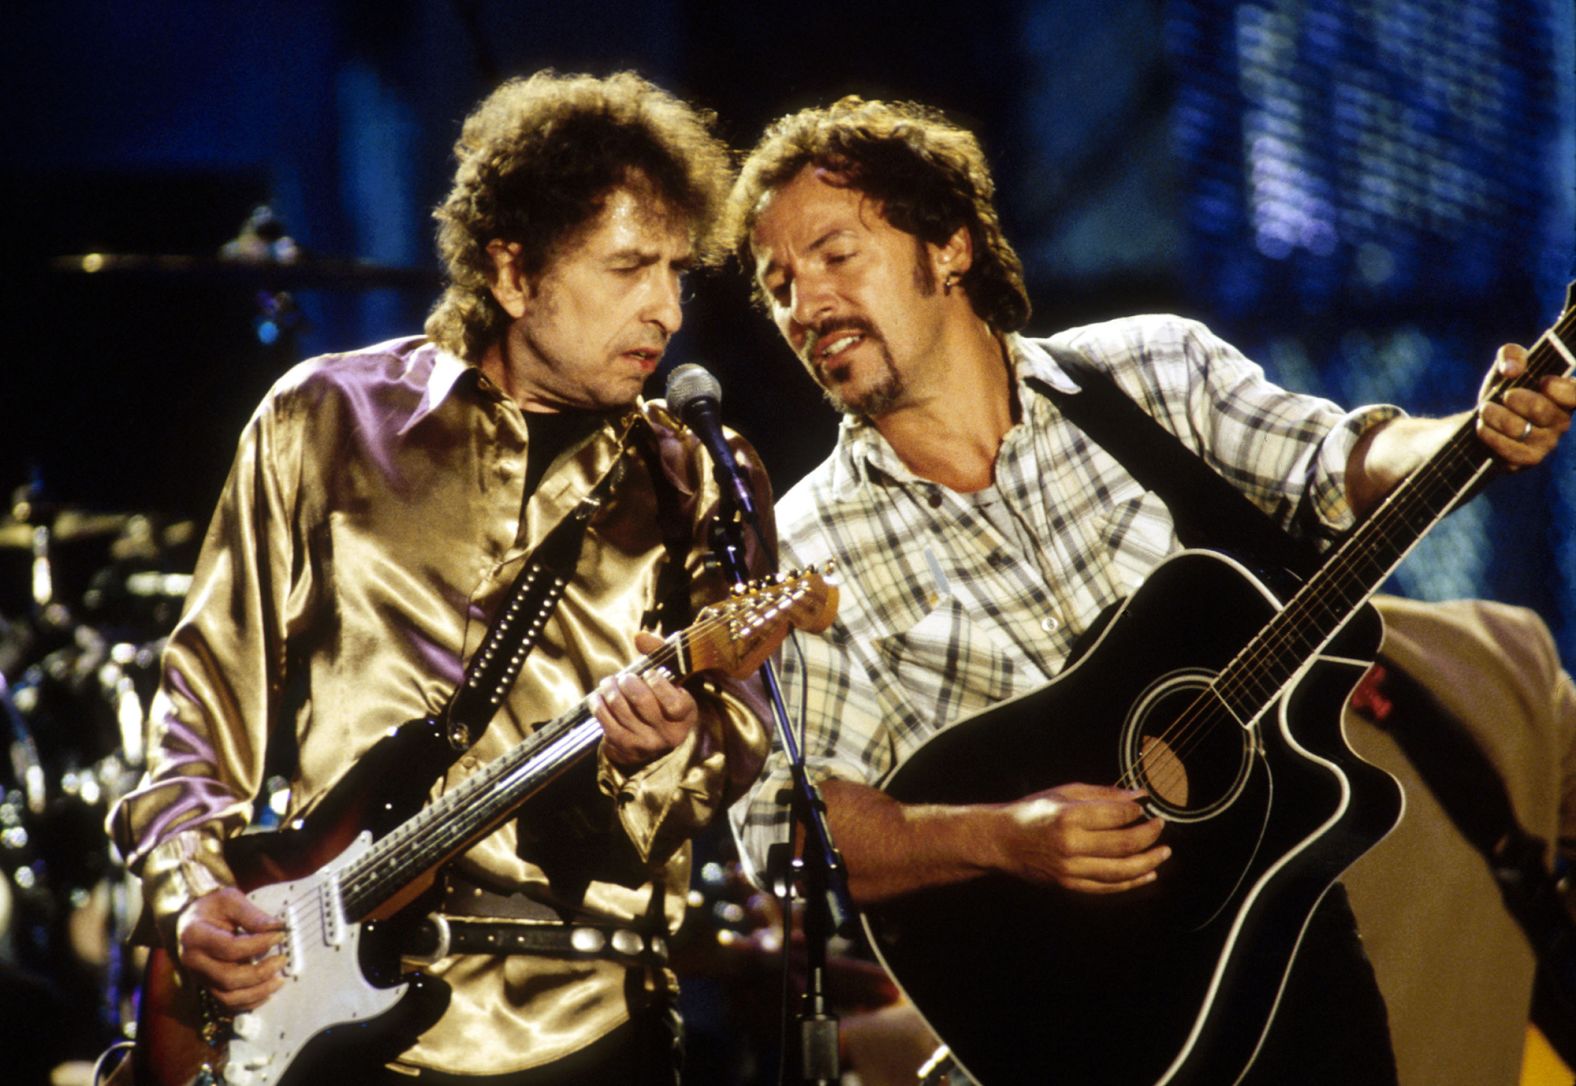 Dylan and Bruce Springsteen perform "Forever Young" at a concert for the Rock & Roll Hall of Fame in 1995.